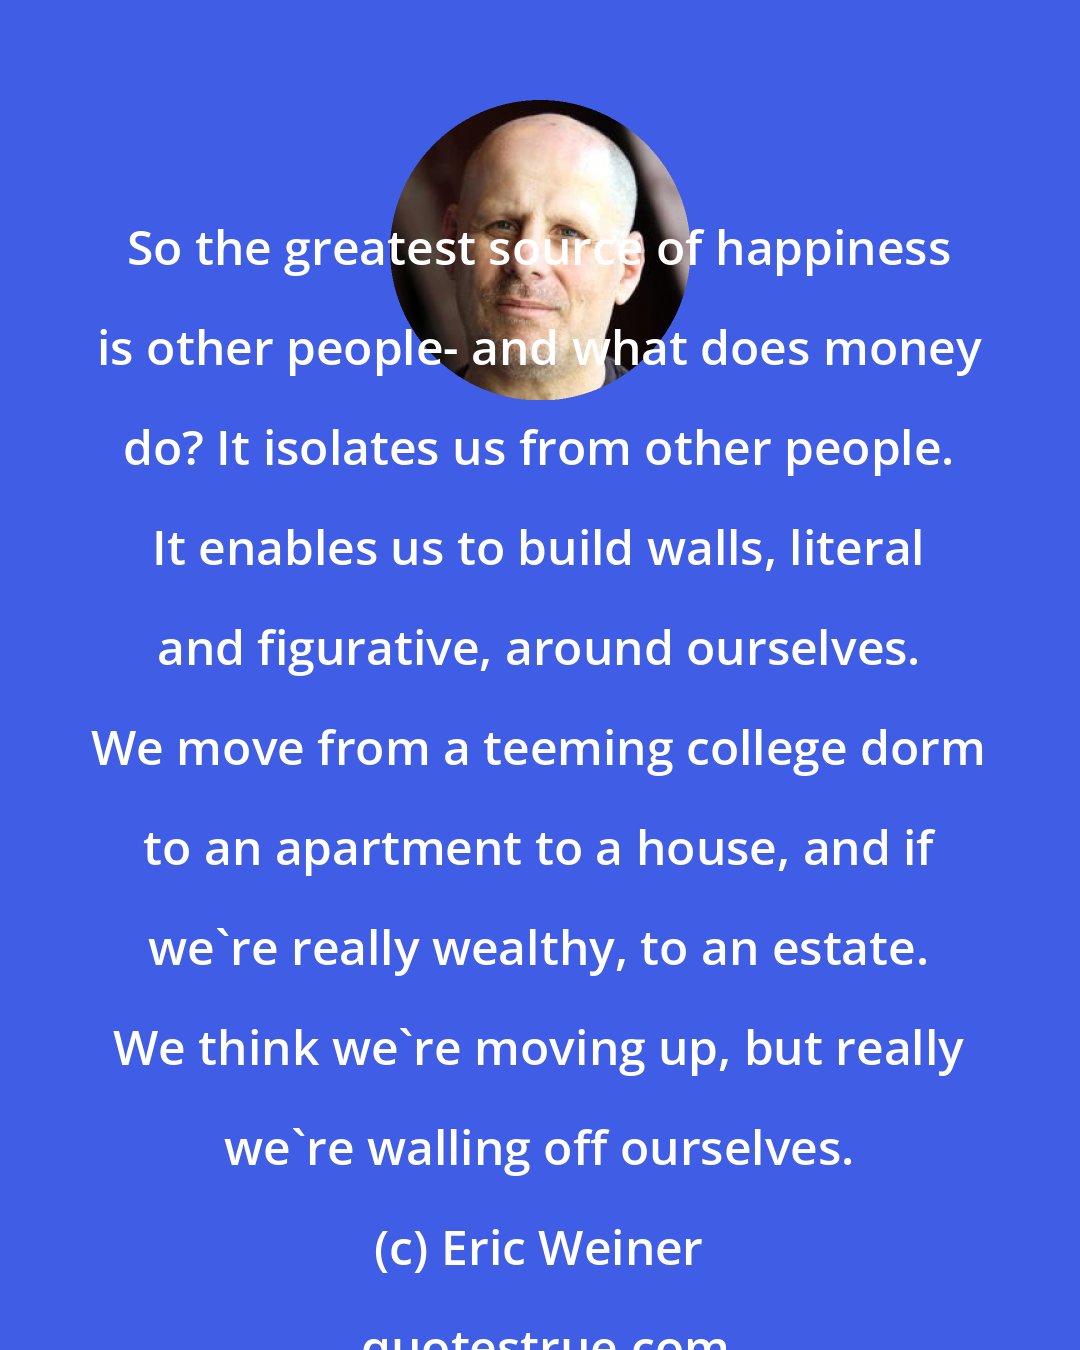 Eric Weiner: So the greatest source of happiness is other people- and what does money do? It isolates us from other people. It enables us to build walls, literal and figurative, around ourselves. We move from a teeming college dorm to an apartment to a house, and if we're really wealthy, to an estate. We think we're moving up, but really we're walling off ourselves.